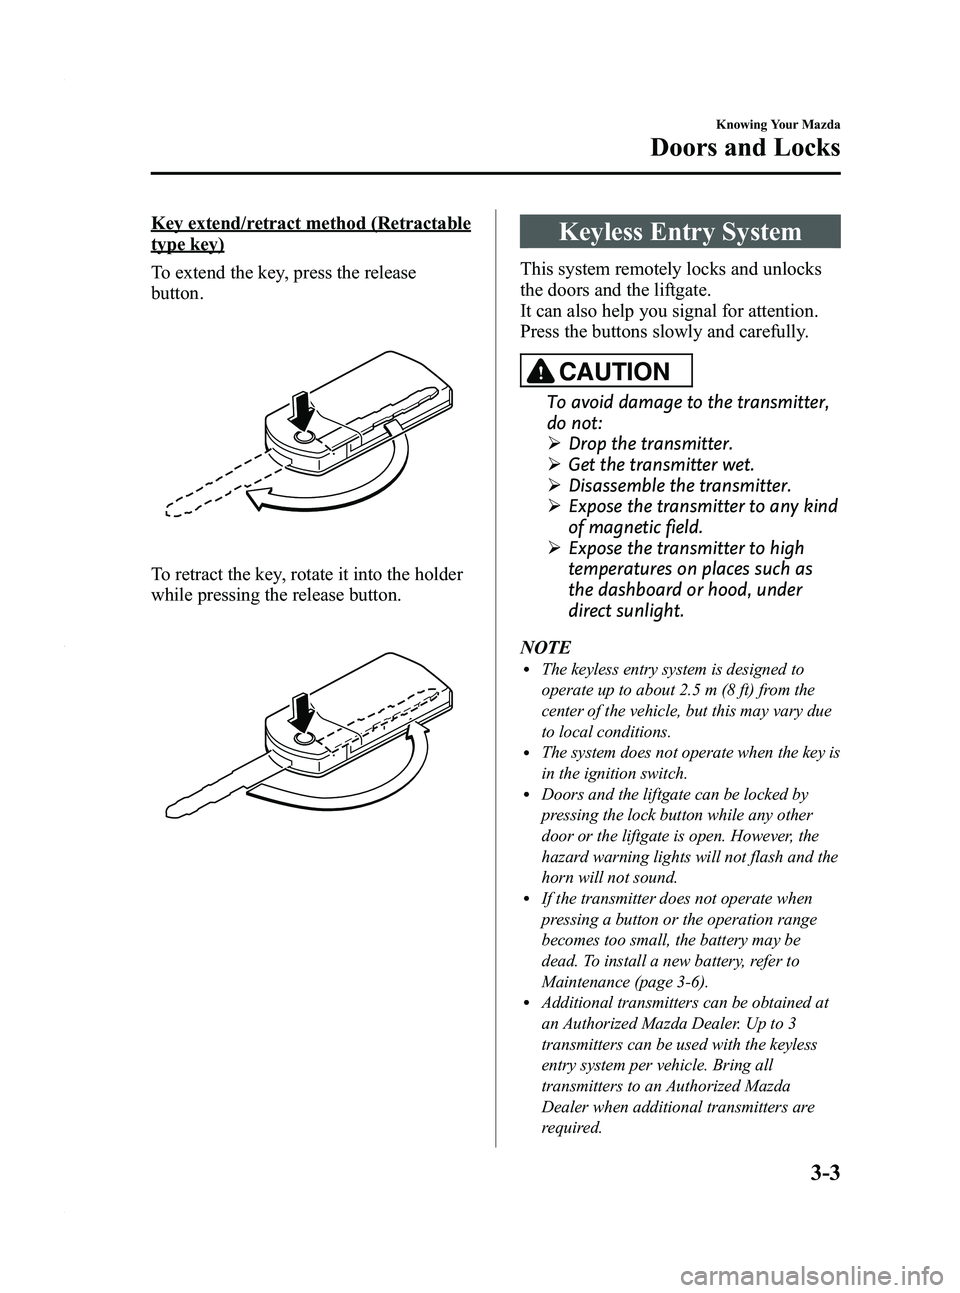 MAZDA MODEL 5 2010  Owners Manual Black plate (69,1)
Key extend/retract method (Retractable
type key)
To extend the key, press the release
button.
To retract the key, rotate it into the holder
while pressing the release button.
Keyles